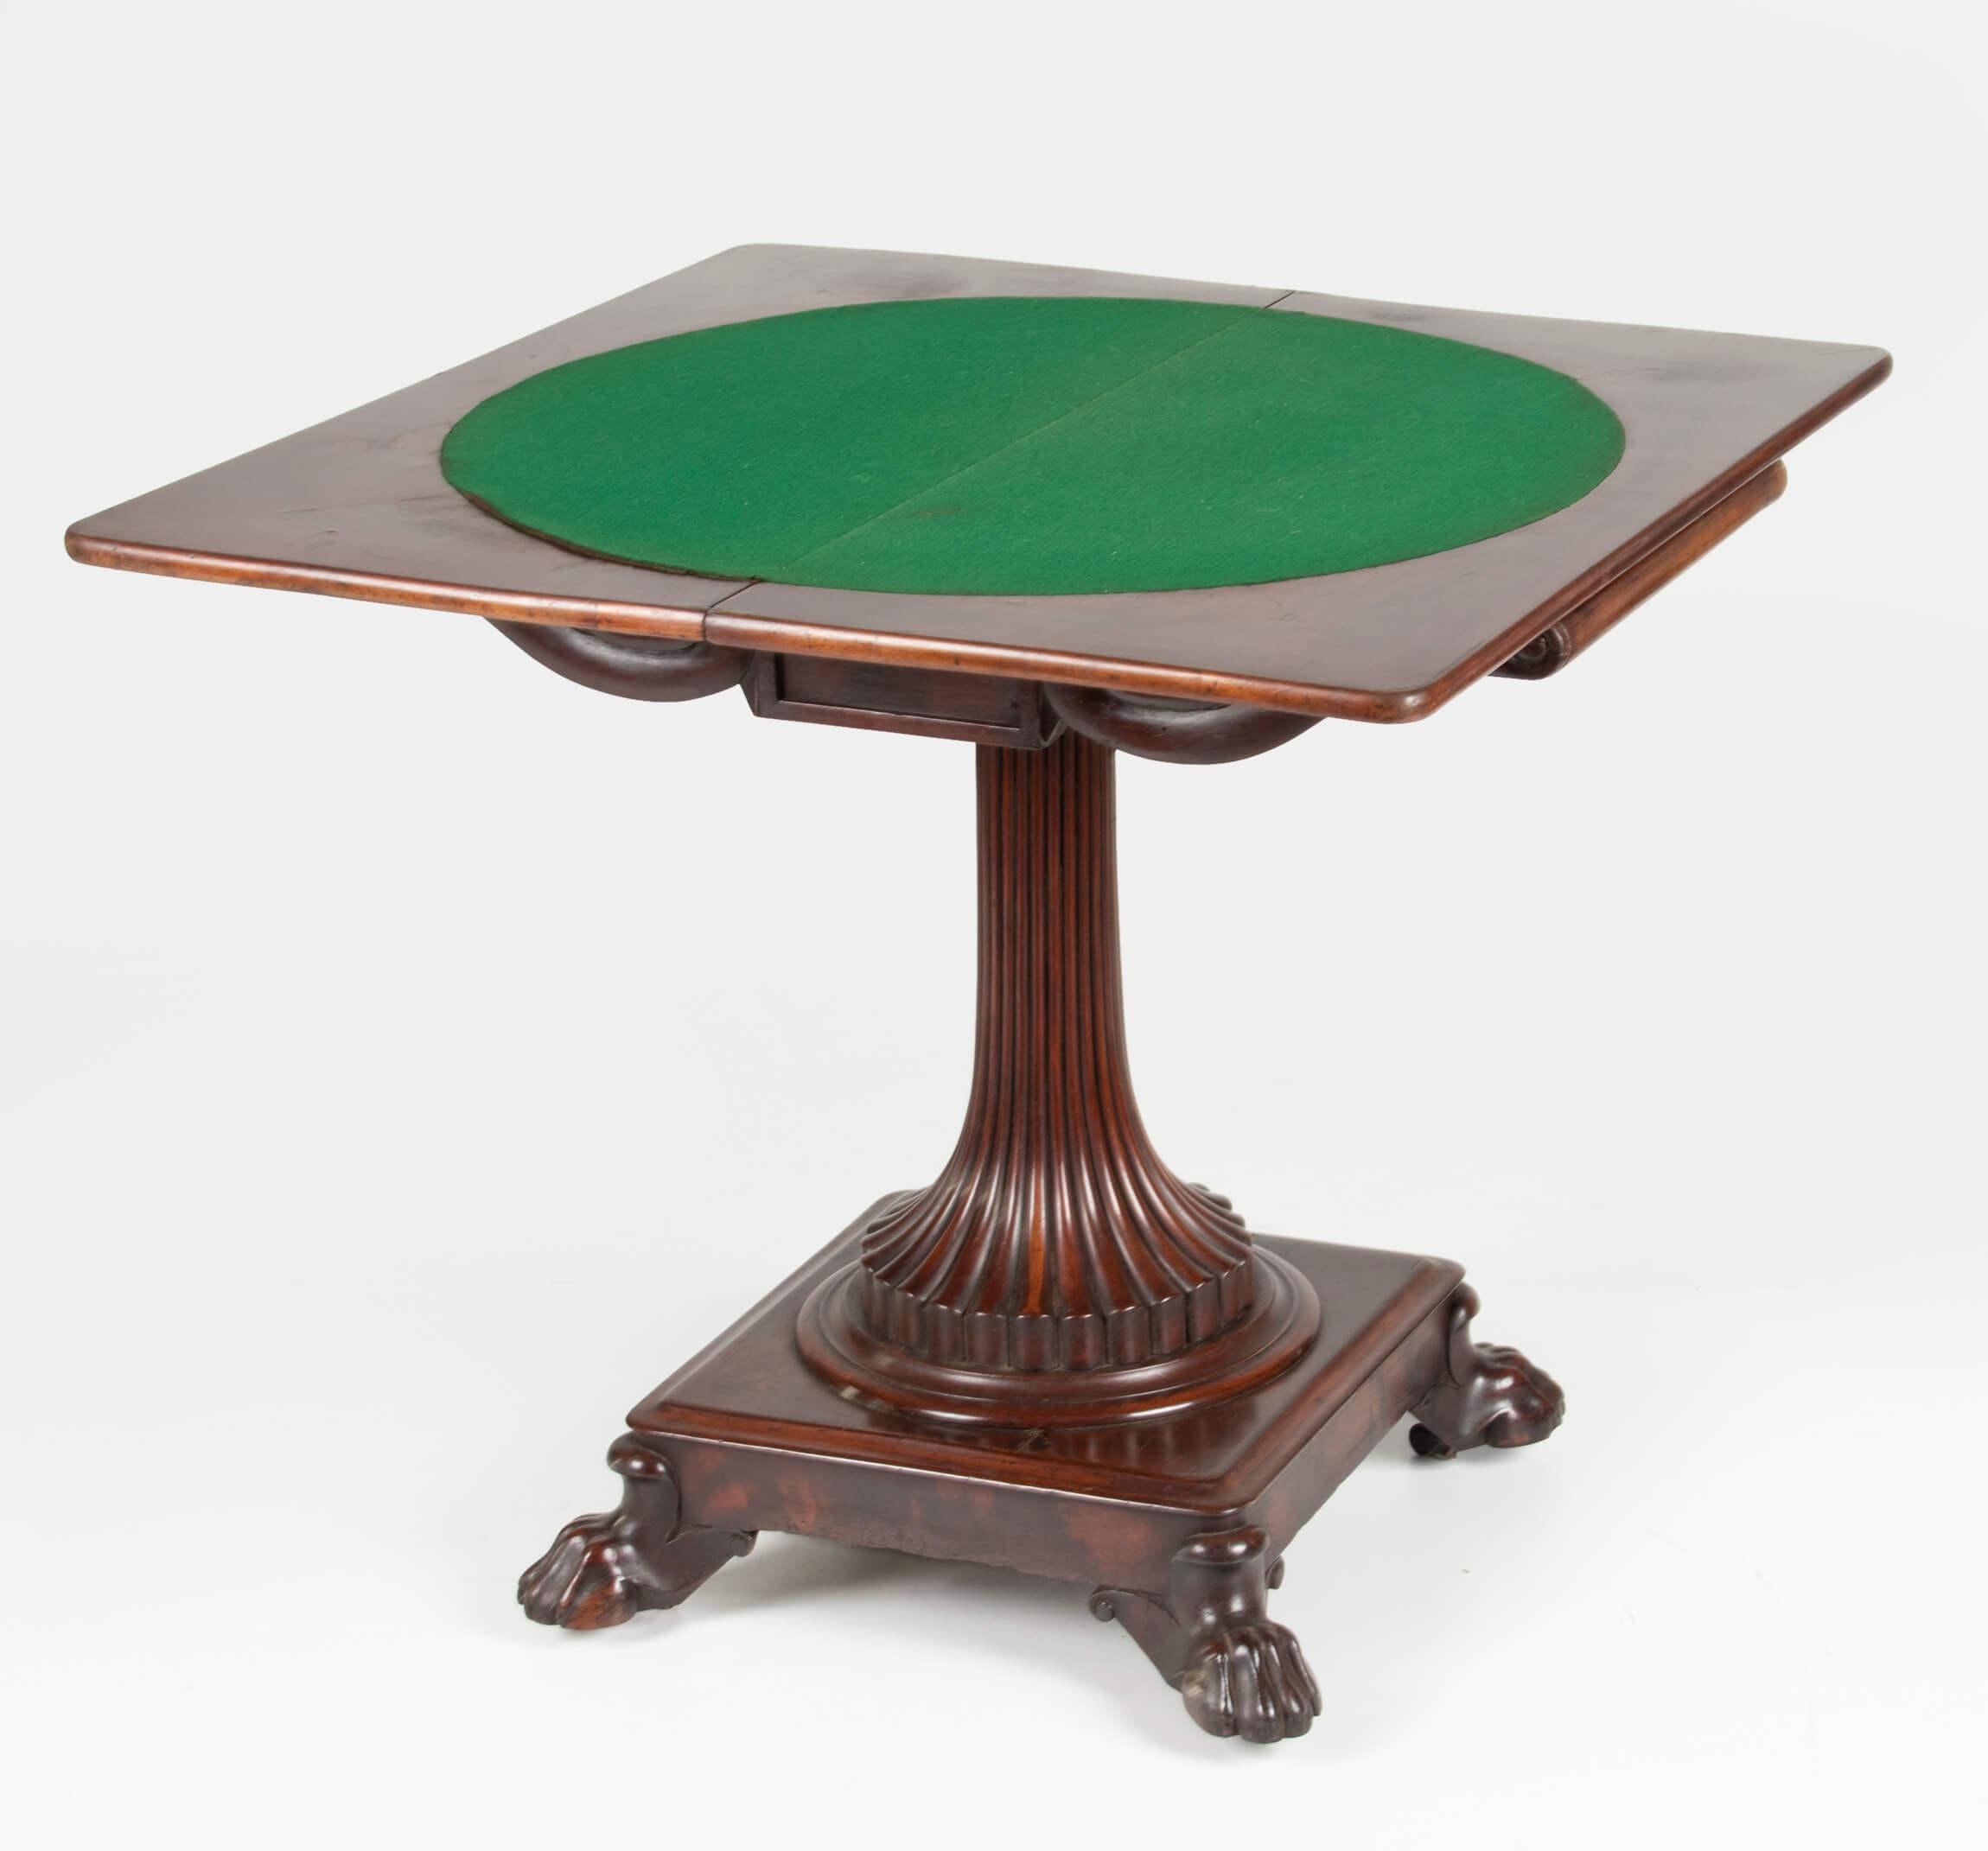 Late 19th Century 19th Century English Mahogany Regency Flip Top Game Table and Side Table For Sale